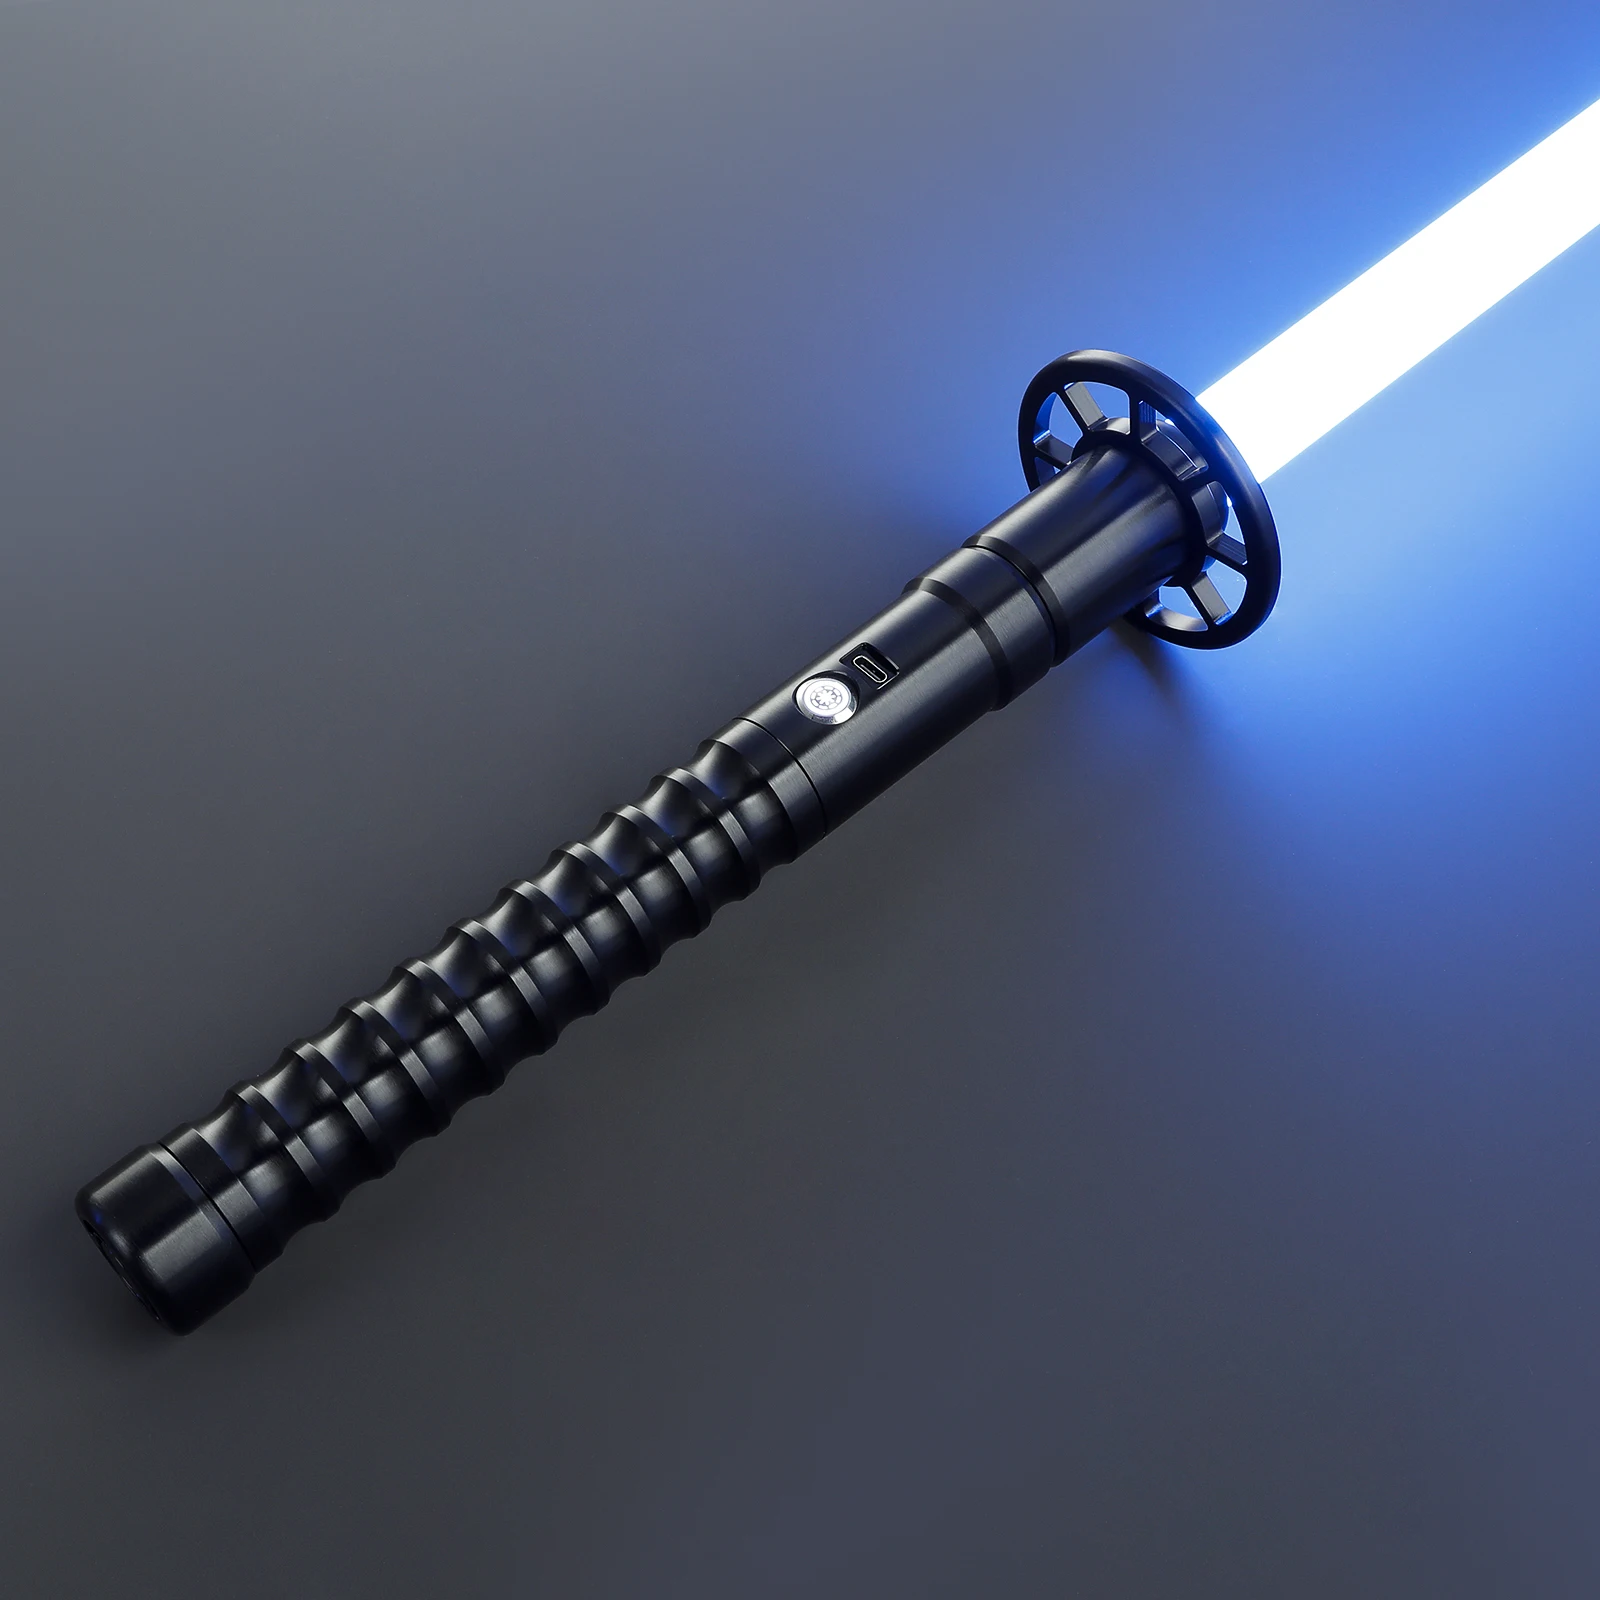 

LGT Saberstudio Force Heavy Dueling Lightsaber Sensitive Smooth Swing with Motion Control Infinite Color Changing with Bluetooth